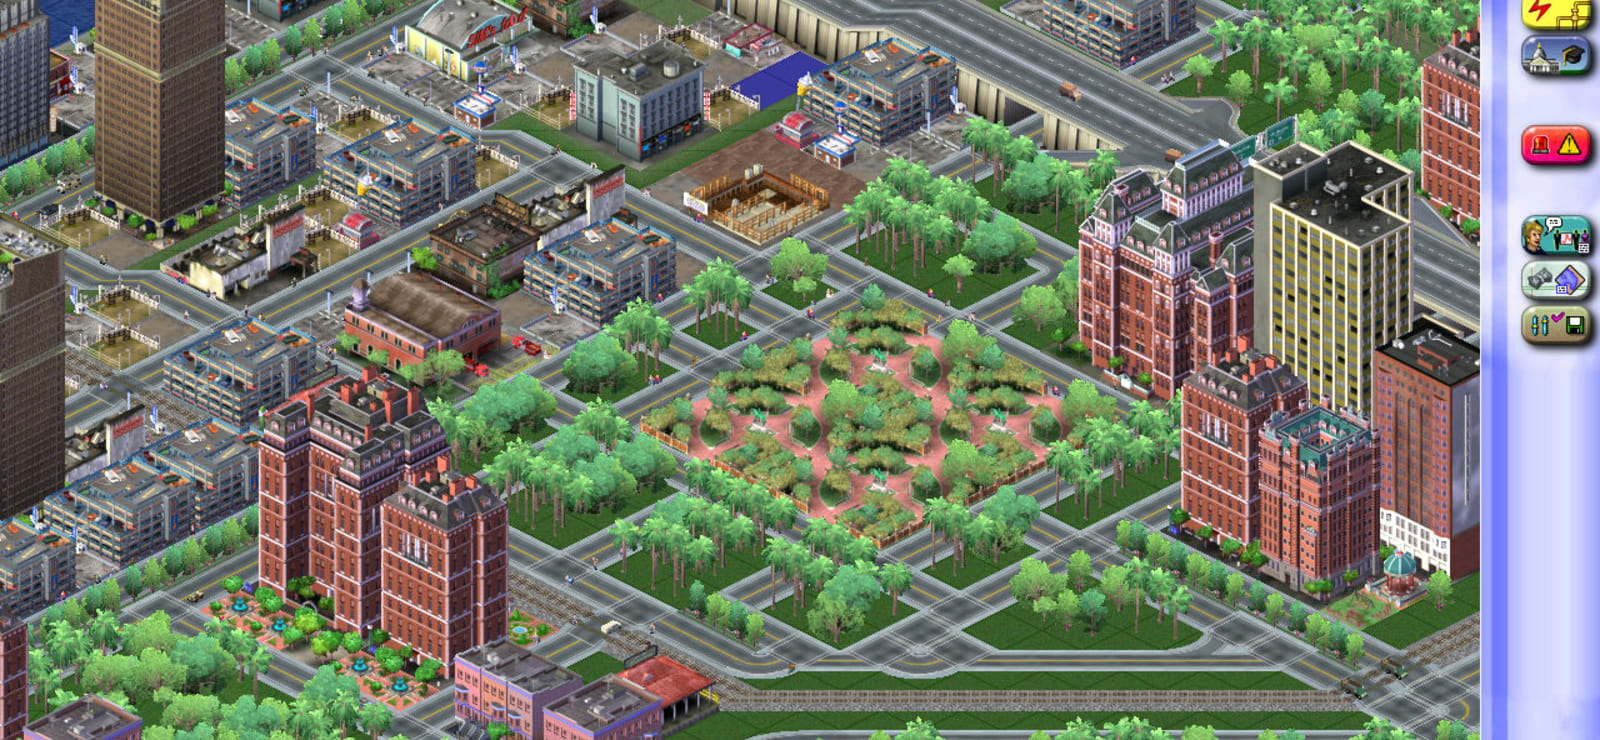 BESTSELLER - SimCity™ 3000 Unlimited